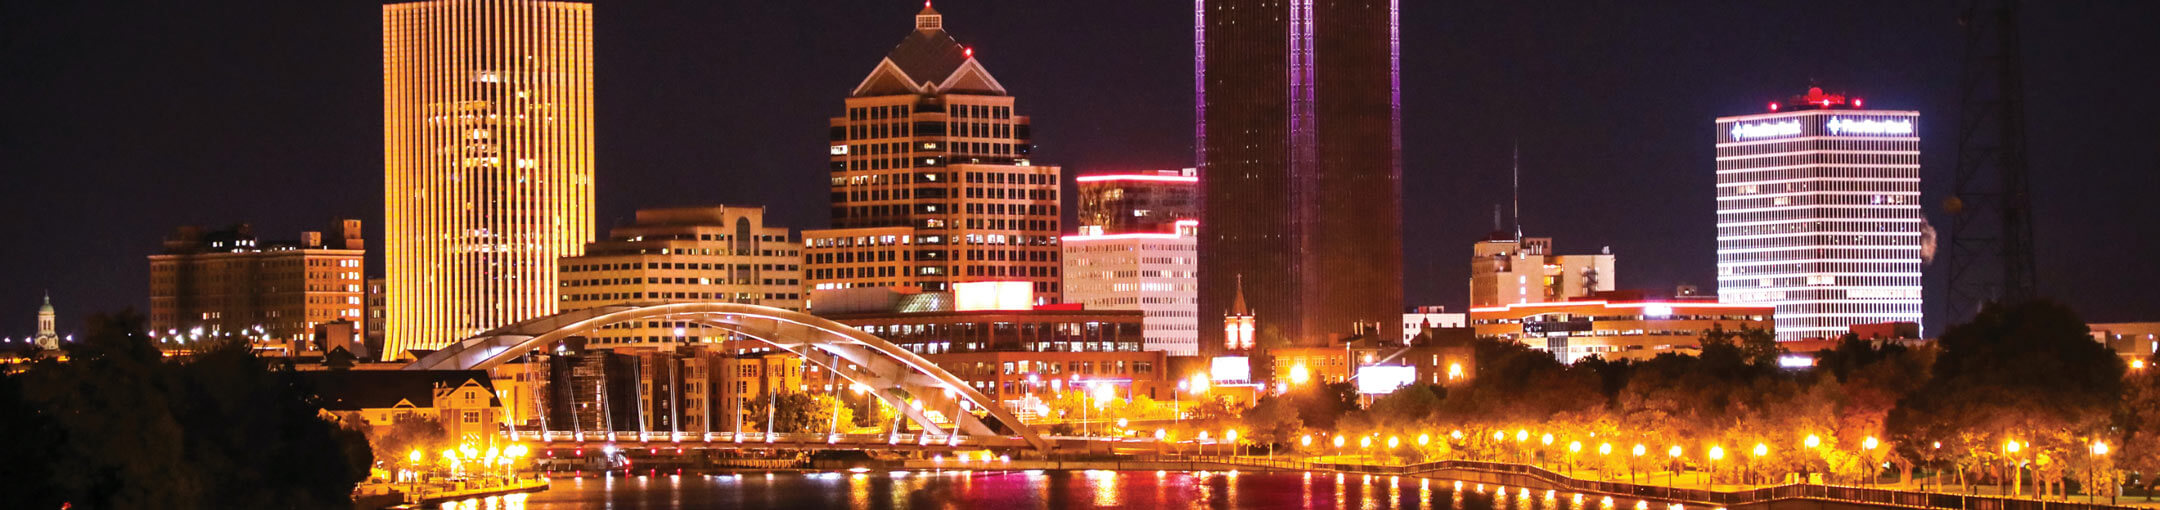 The Rochester skyline at night.